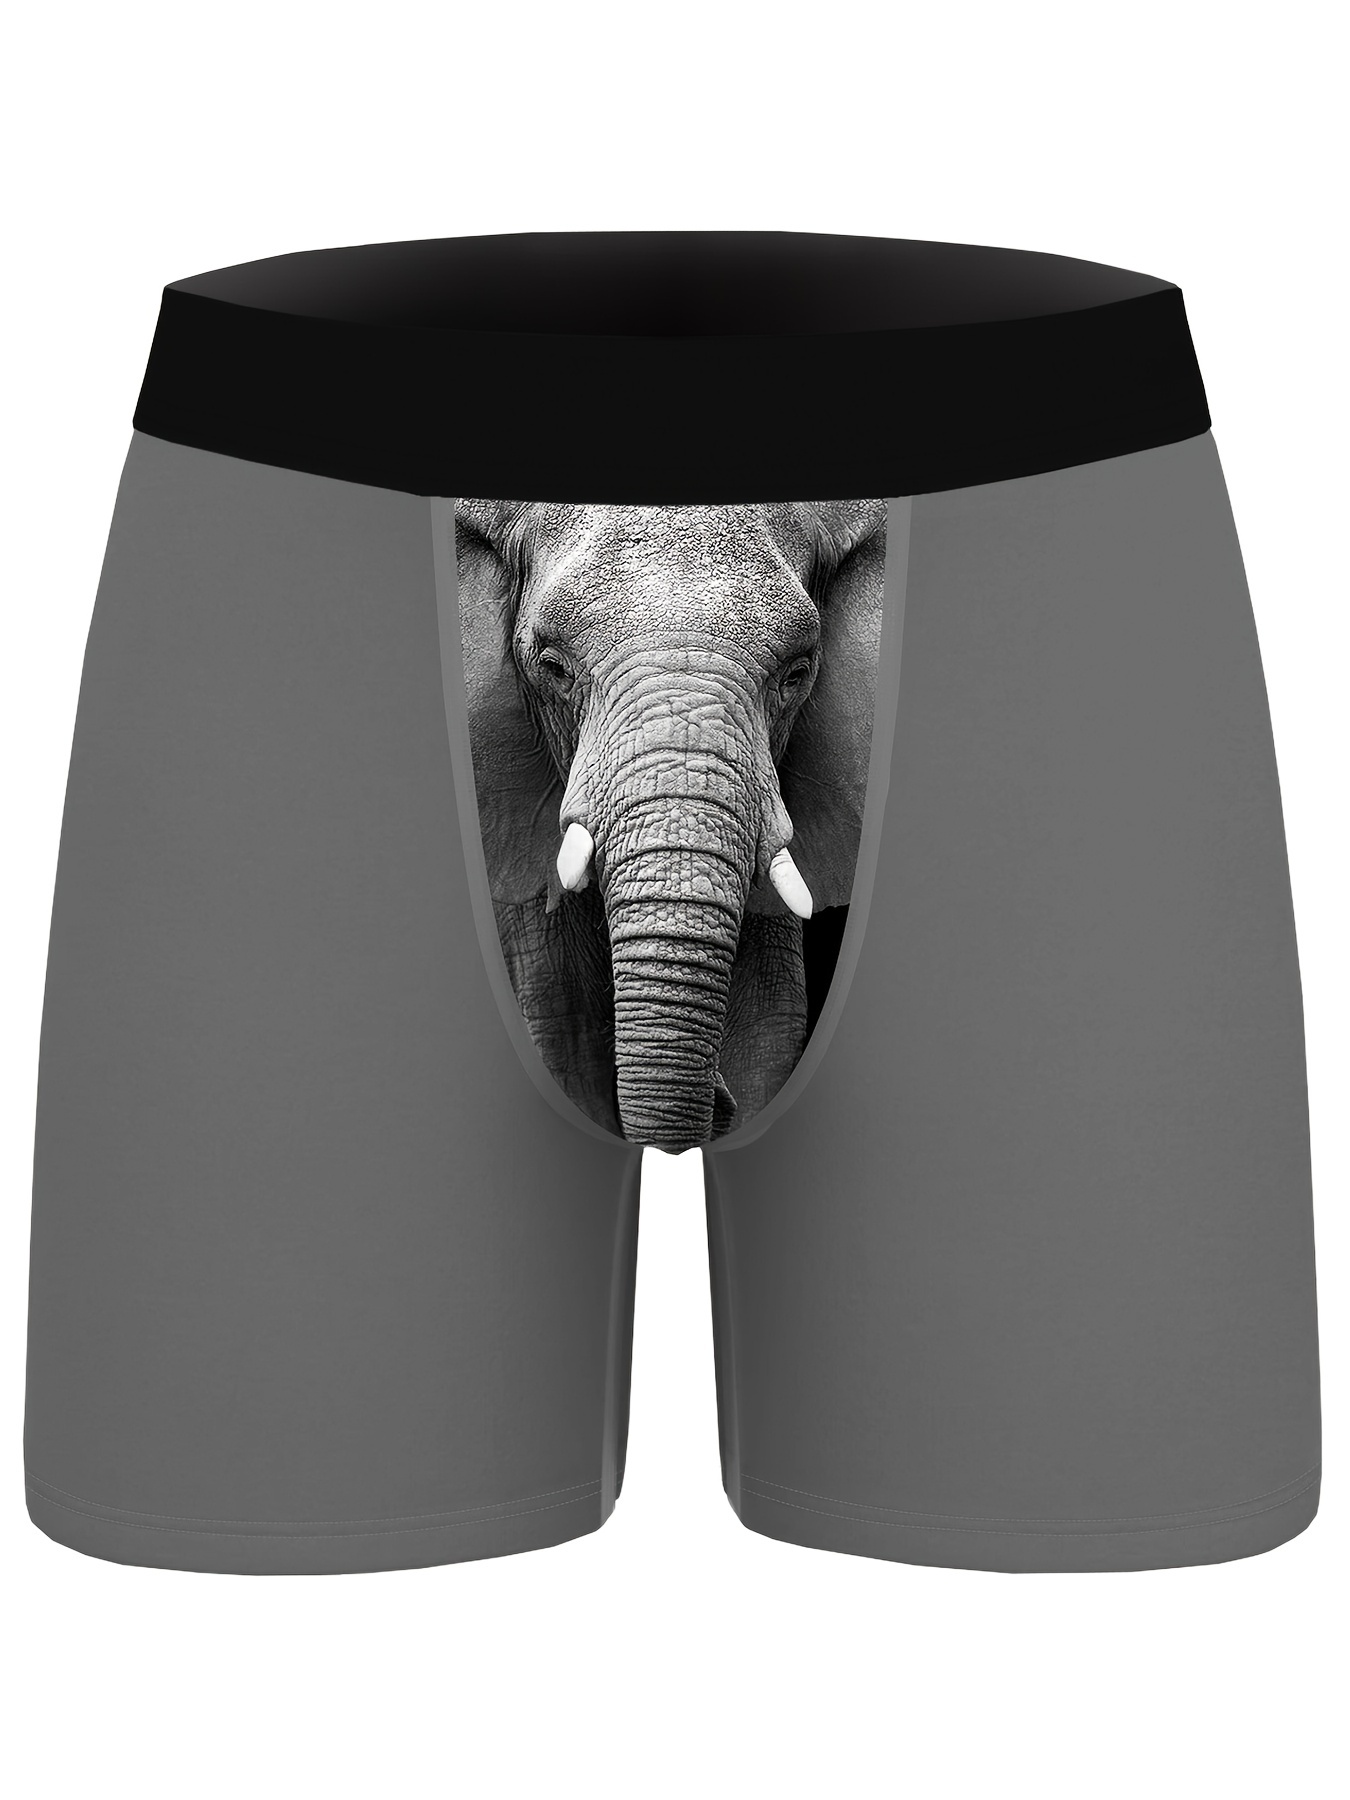 Men's fashion Sexy Elephant Nose Shape Cotton Penis Exposure Comfortable  Boxers Briefs, Solid Color Underwear With Separation Pouch For Teen Men